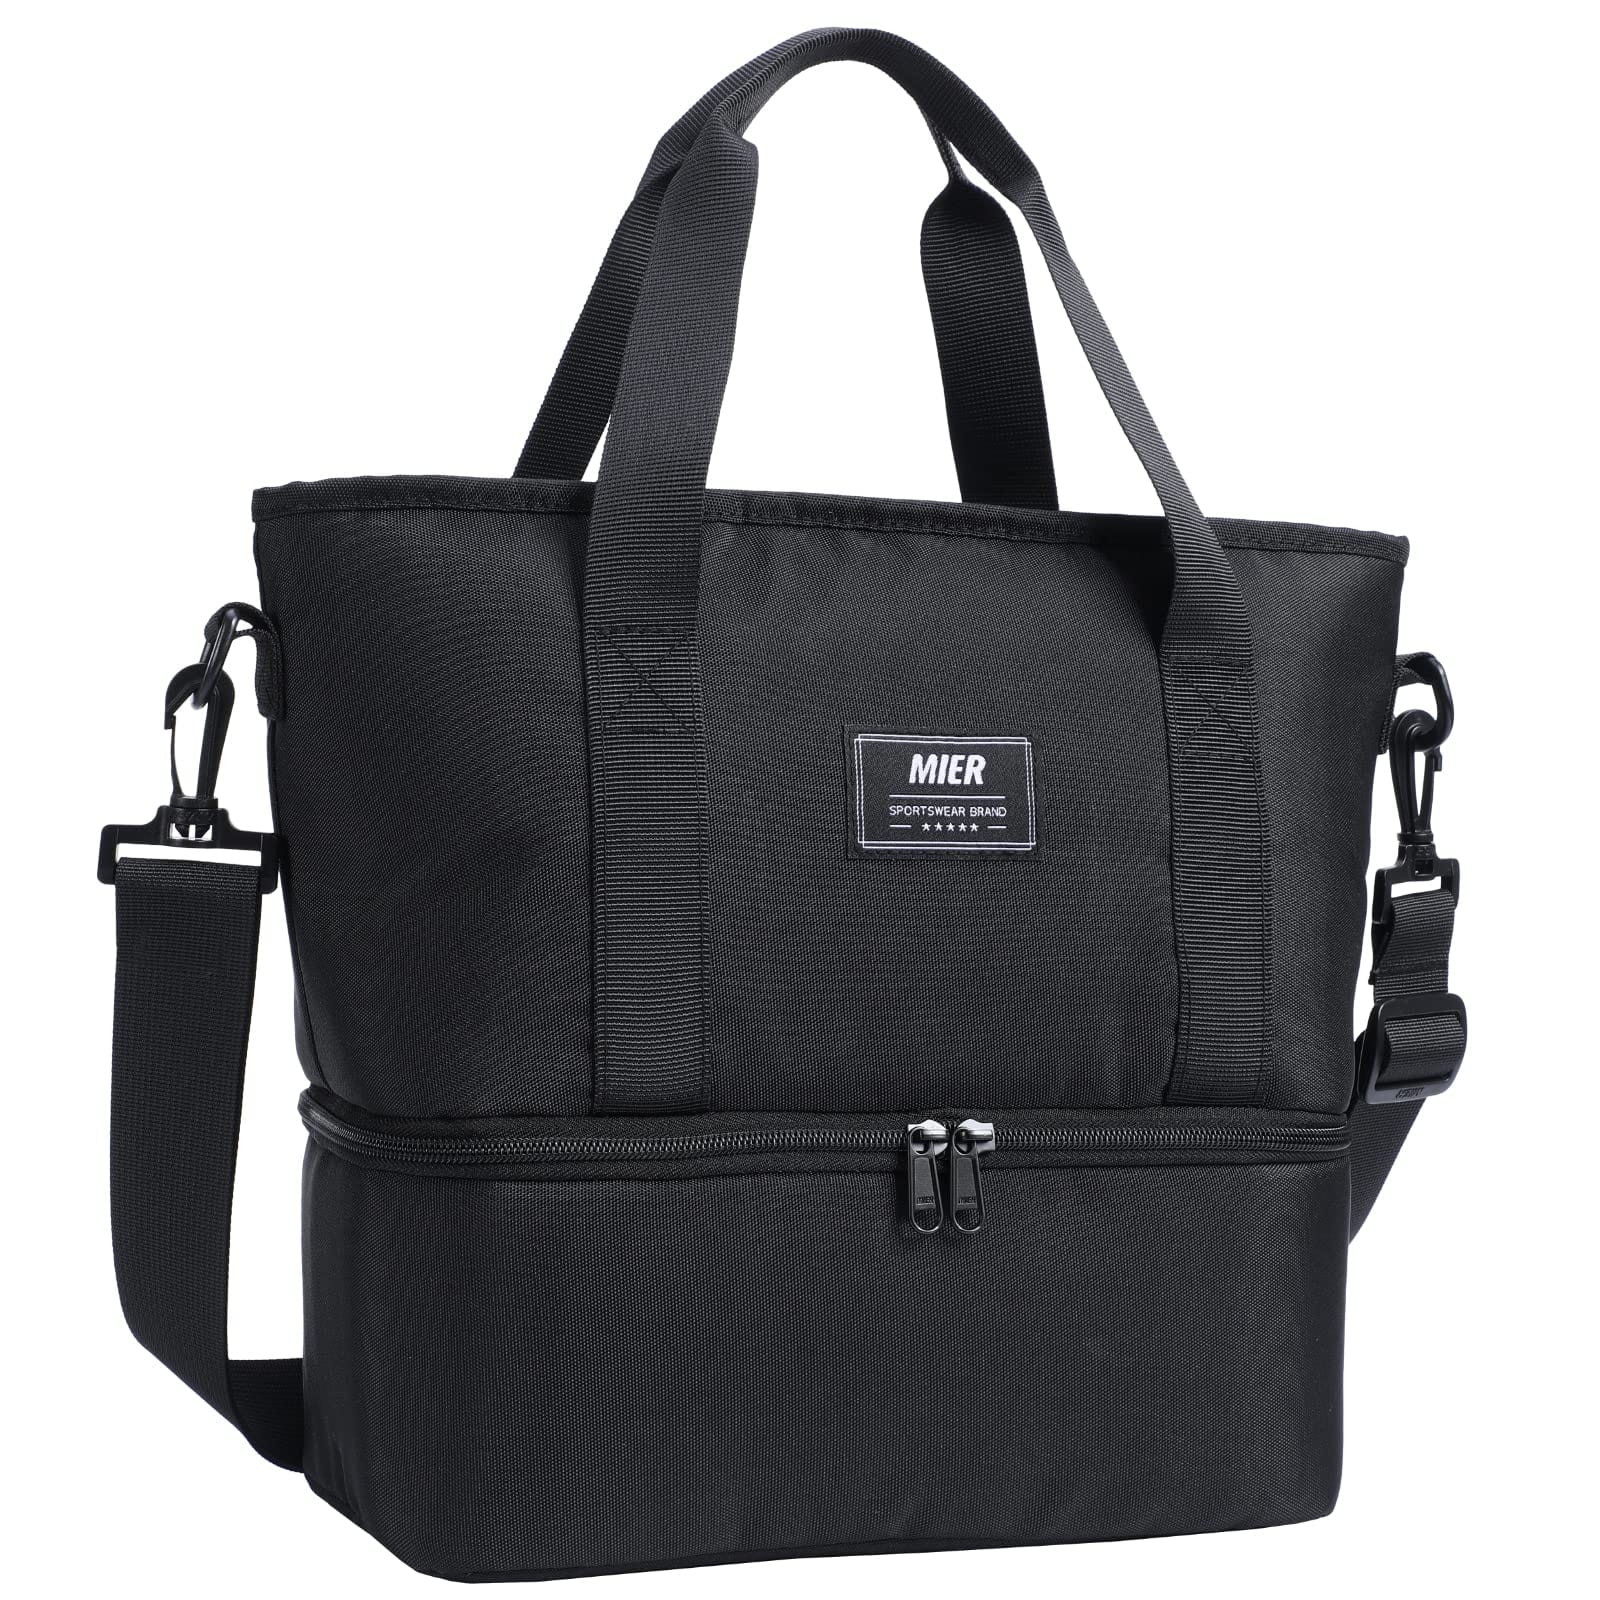 MIER Stylish Lunch Bag for Women Insulated Lunch Box Totes, Black